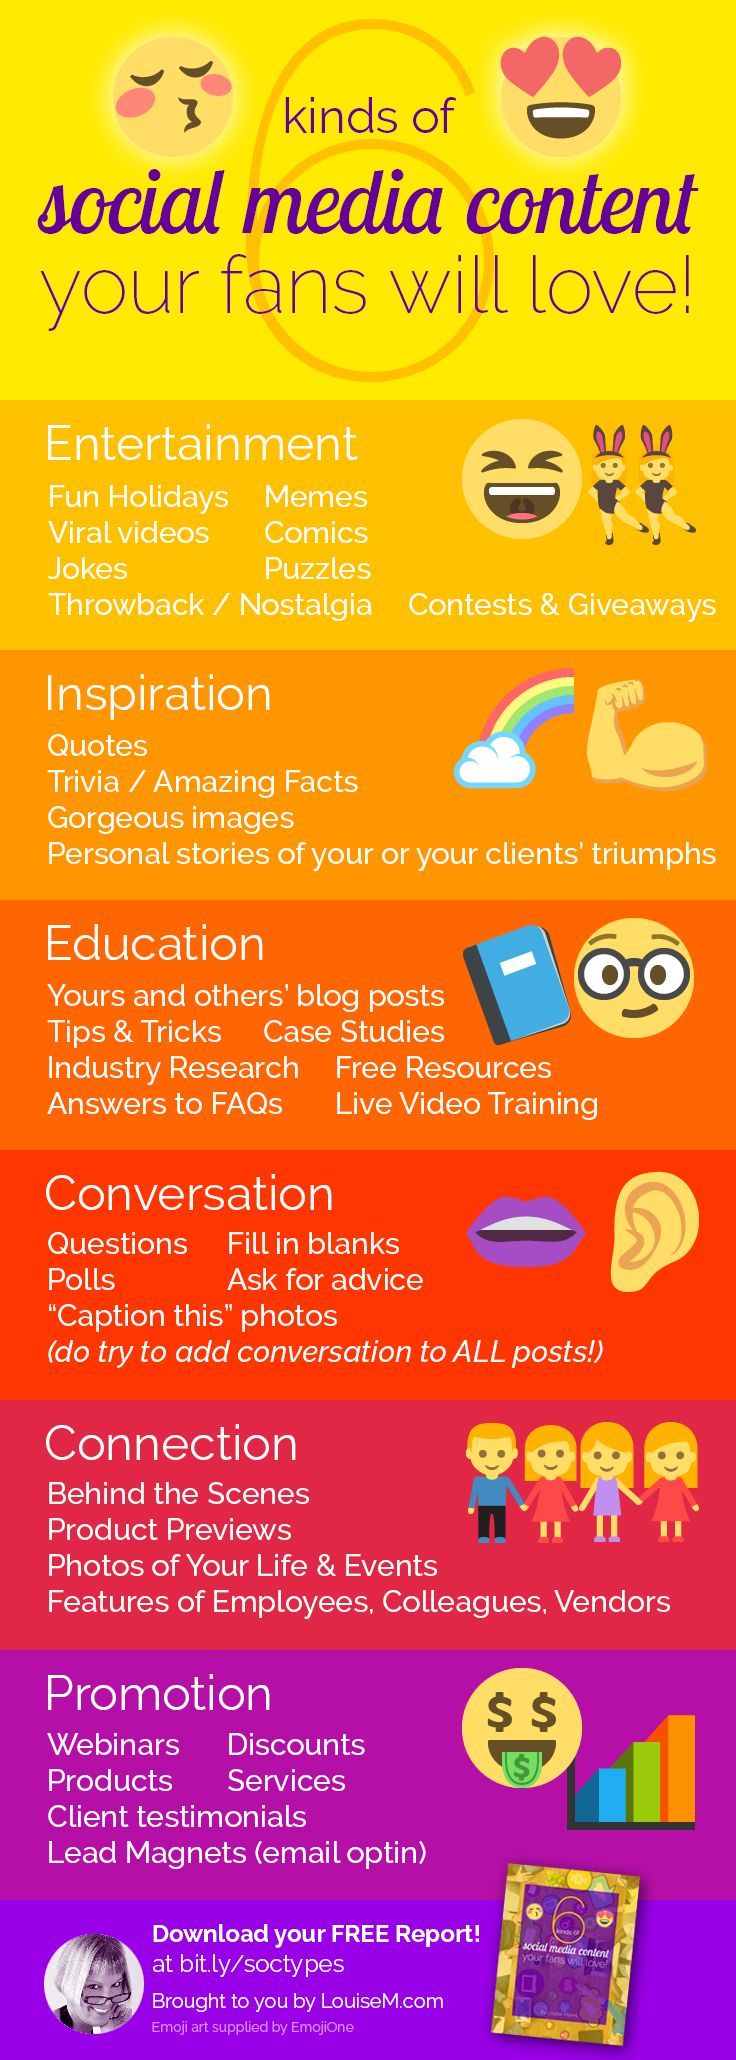 1530165299_957_Marketing-Infographic-Social-media-marketing-tips-Click-to-blog-for-FREE-download-with-content-catego Marketing Infographic : In Social Media Marketing, vary your social media posts to keep your followers e...